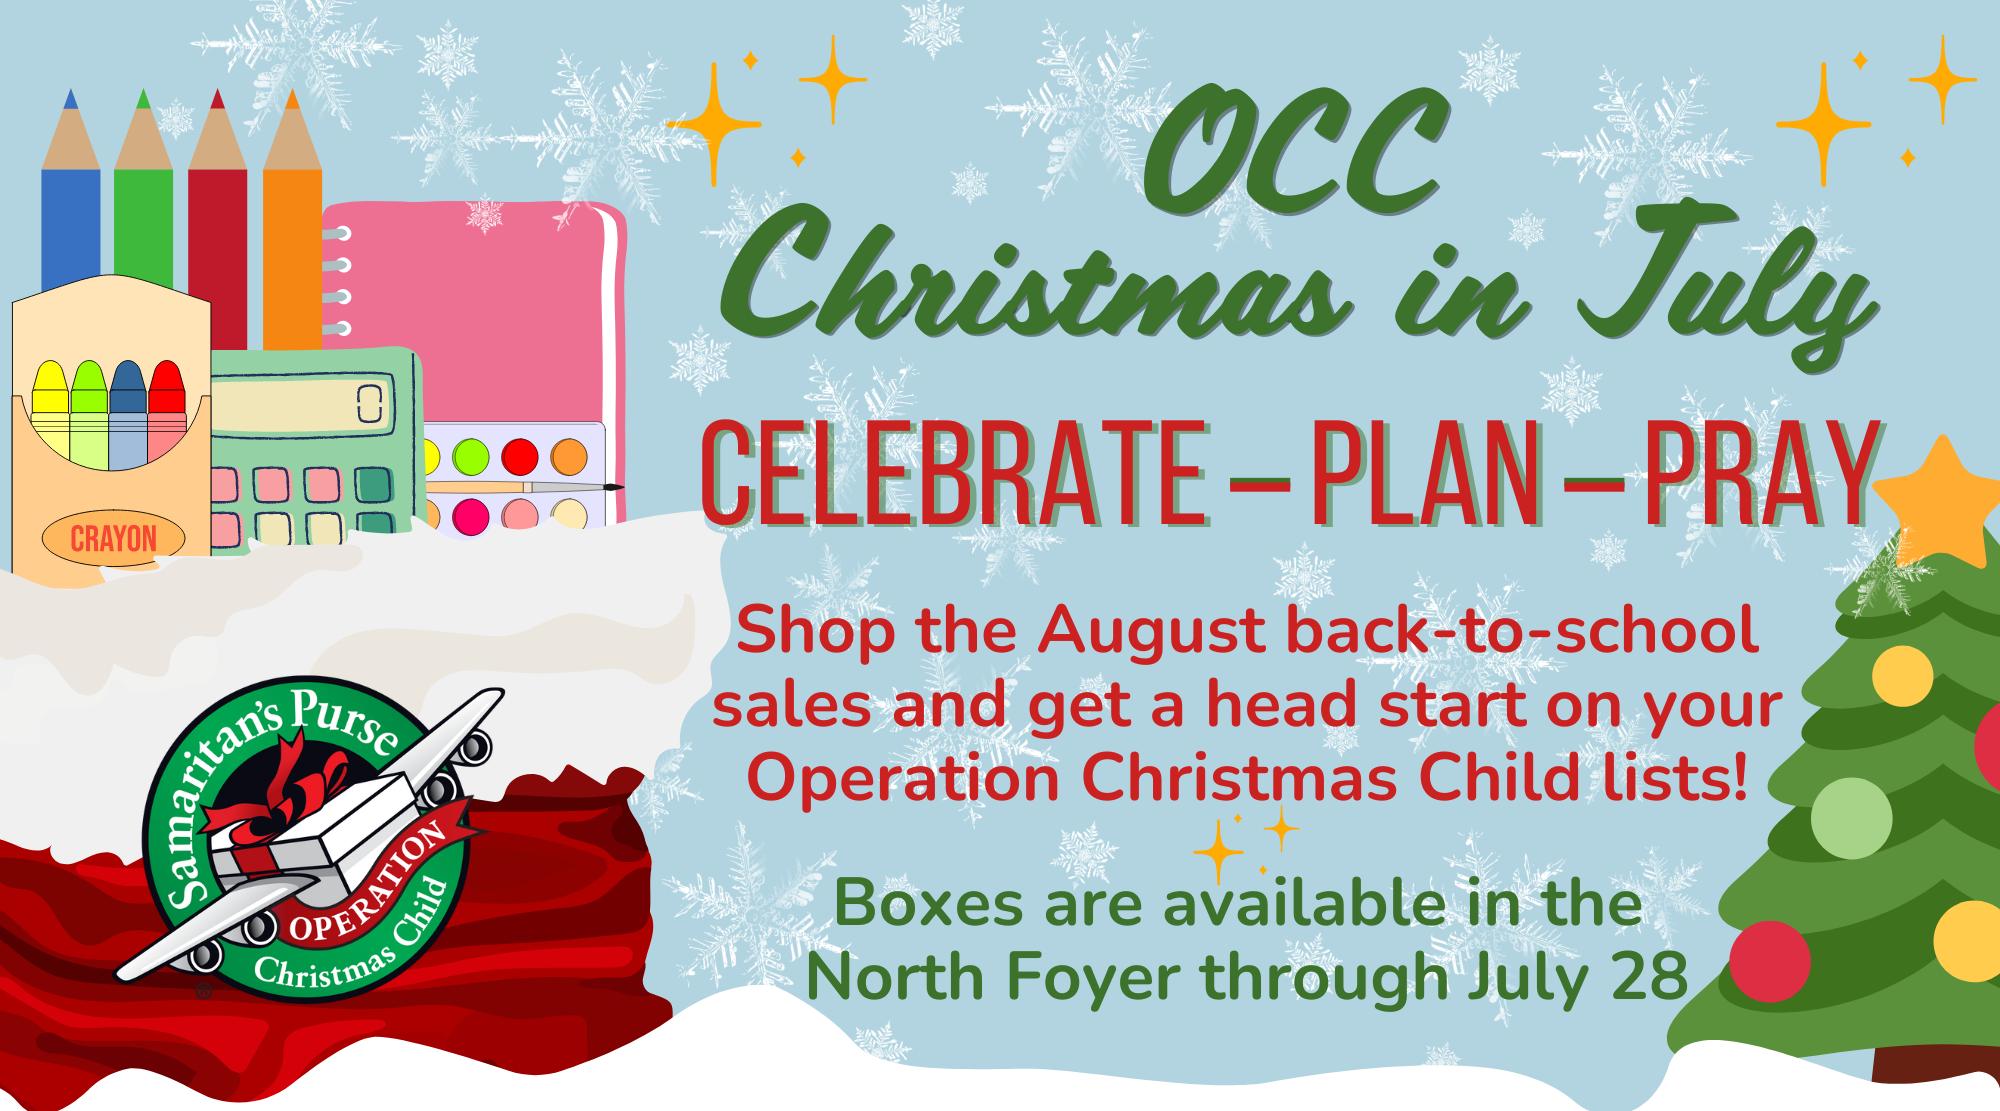 OCC Christmas in July (2)